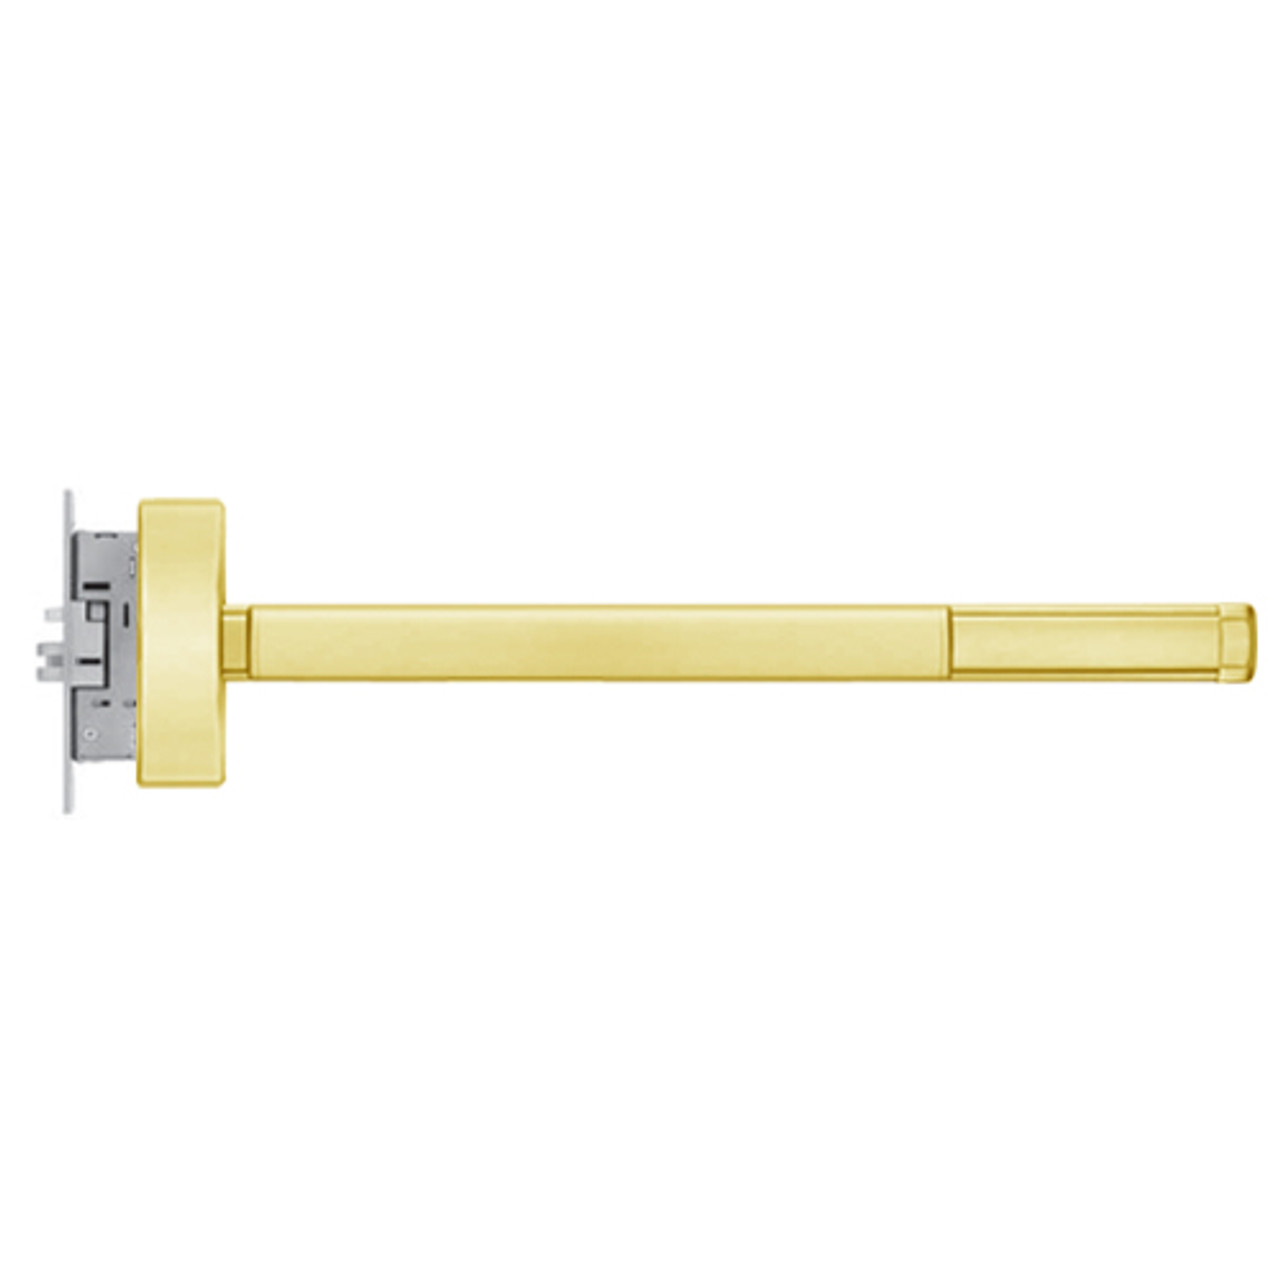 MLRFL2308-RHR-605-48 PHI 2300 Series Fire Rated Apex Mortise Exit Device with Motorized Latch Retraction Prepped for Key Controls Lever/Knob in Bright Brass Finish